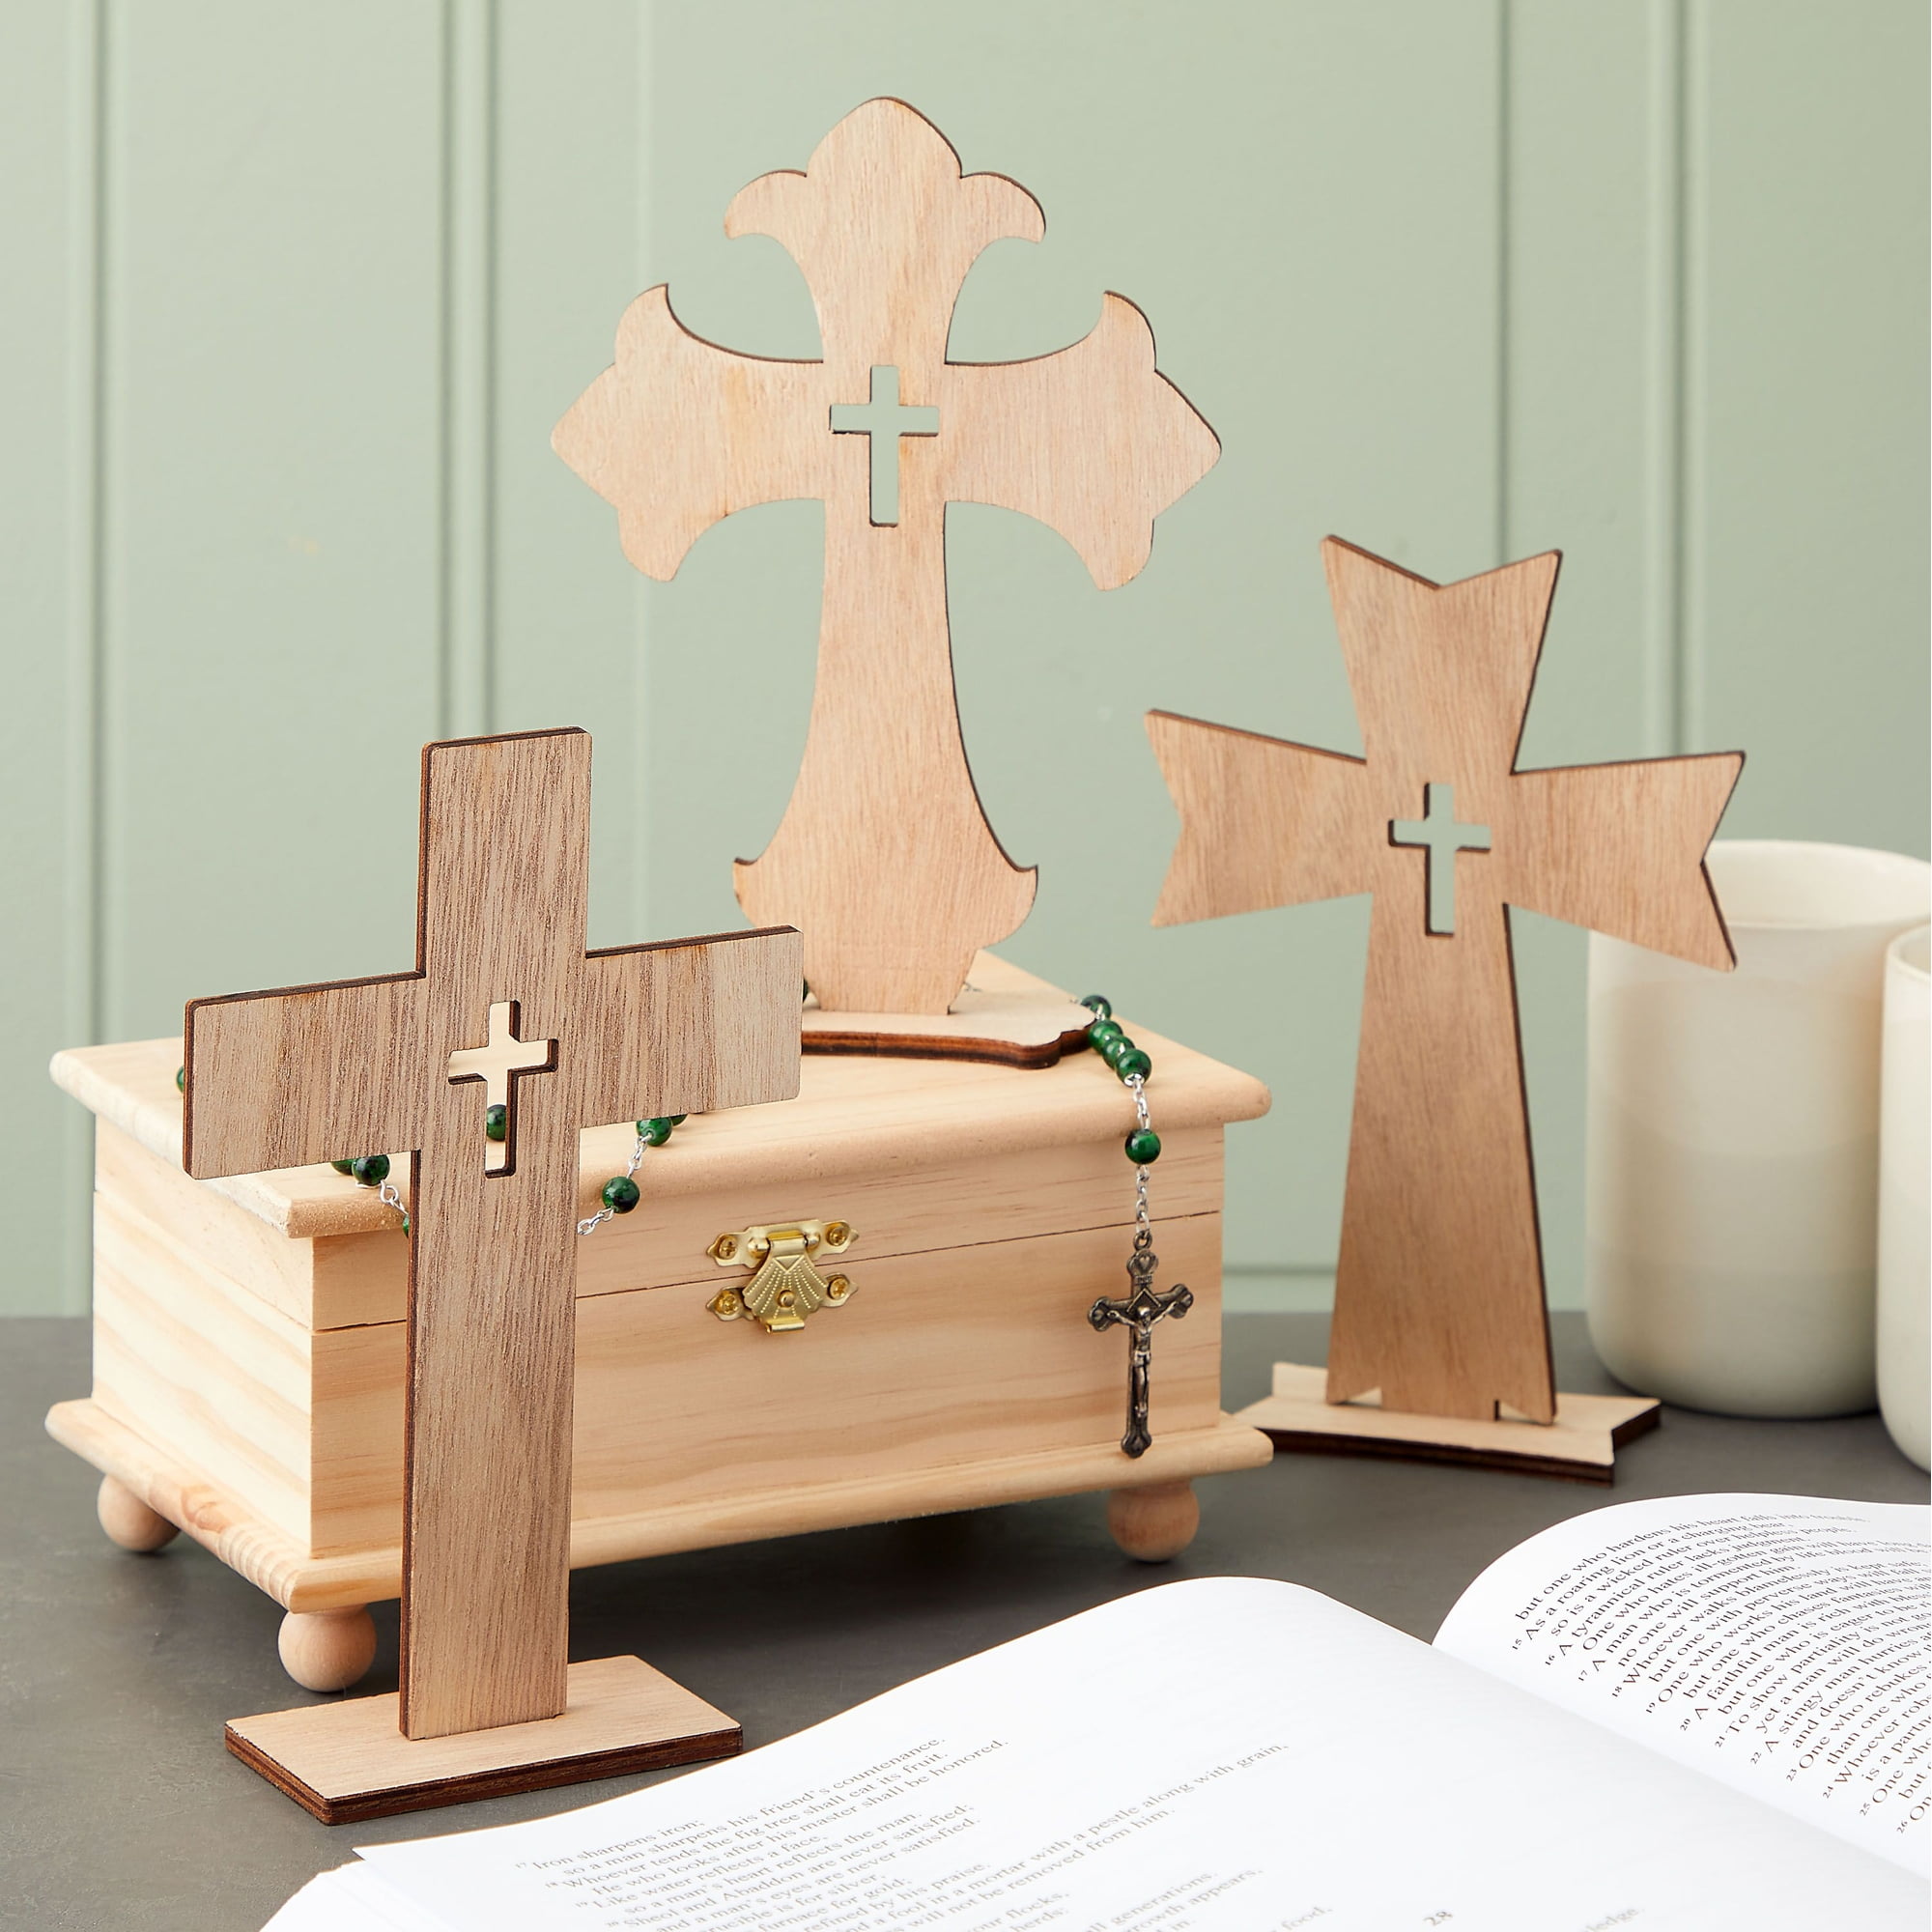 Do It Yourself Wood Crosses (1 Dz) - Crafts for Kids and Fun Home Activities